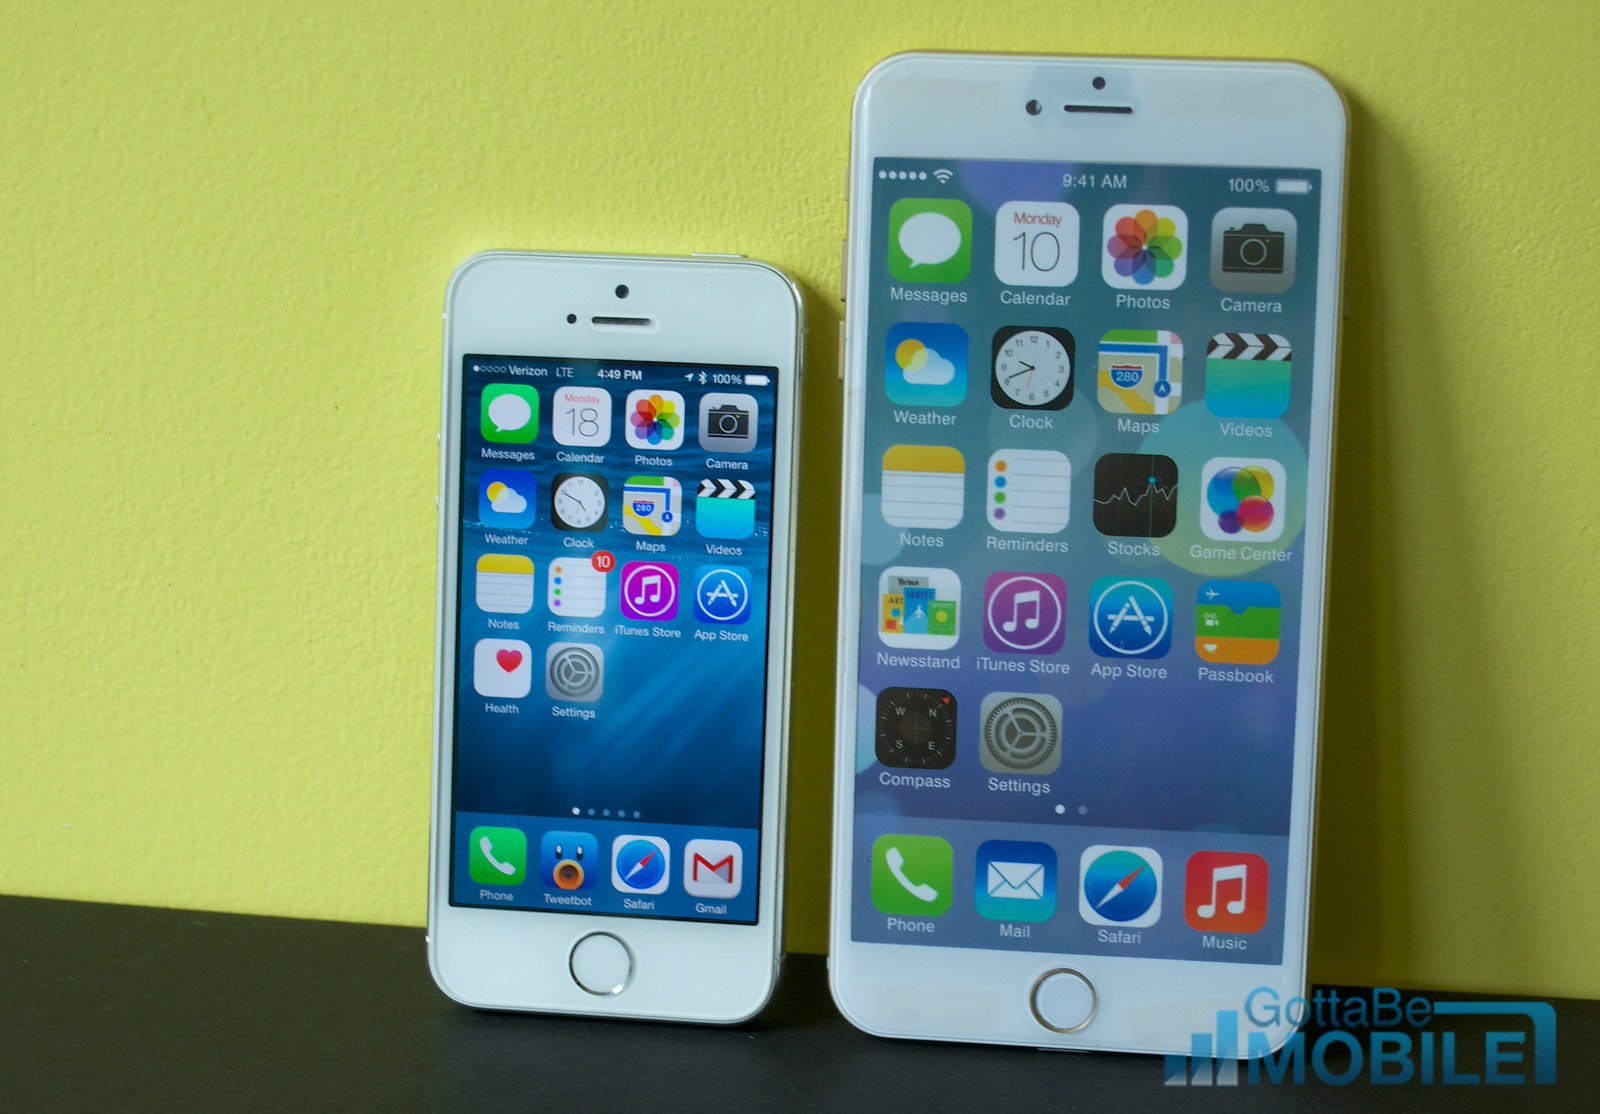 Expect a special iOS 8 feature on the 5.5-inch iPhone 6.